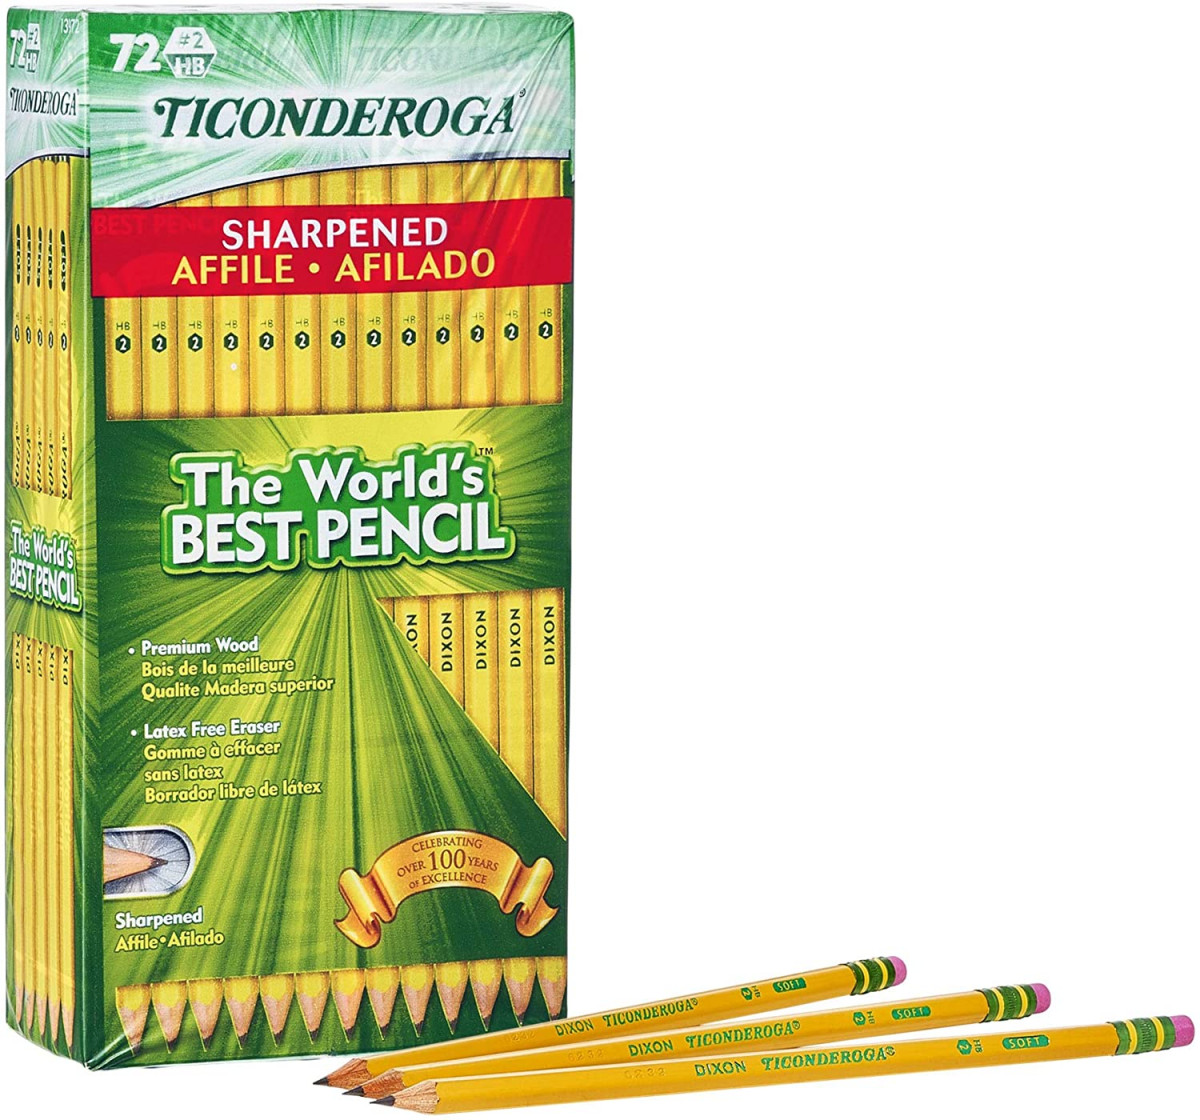 Alea's Deals TICONDEROGA Pencils, Wood-Cased #2 HB Soft, Pre-Sharpened with Eraser, Yellow, 72-Pack (13972) Up to 55% Off! Was $21.29!  